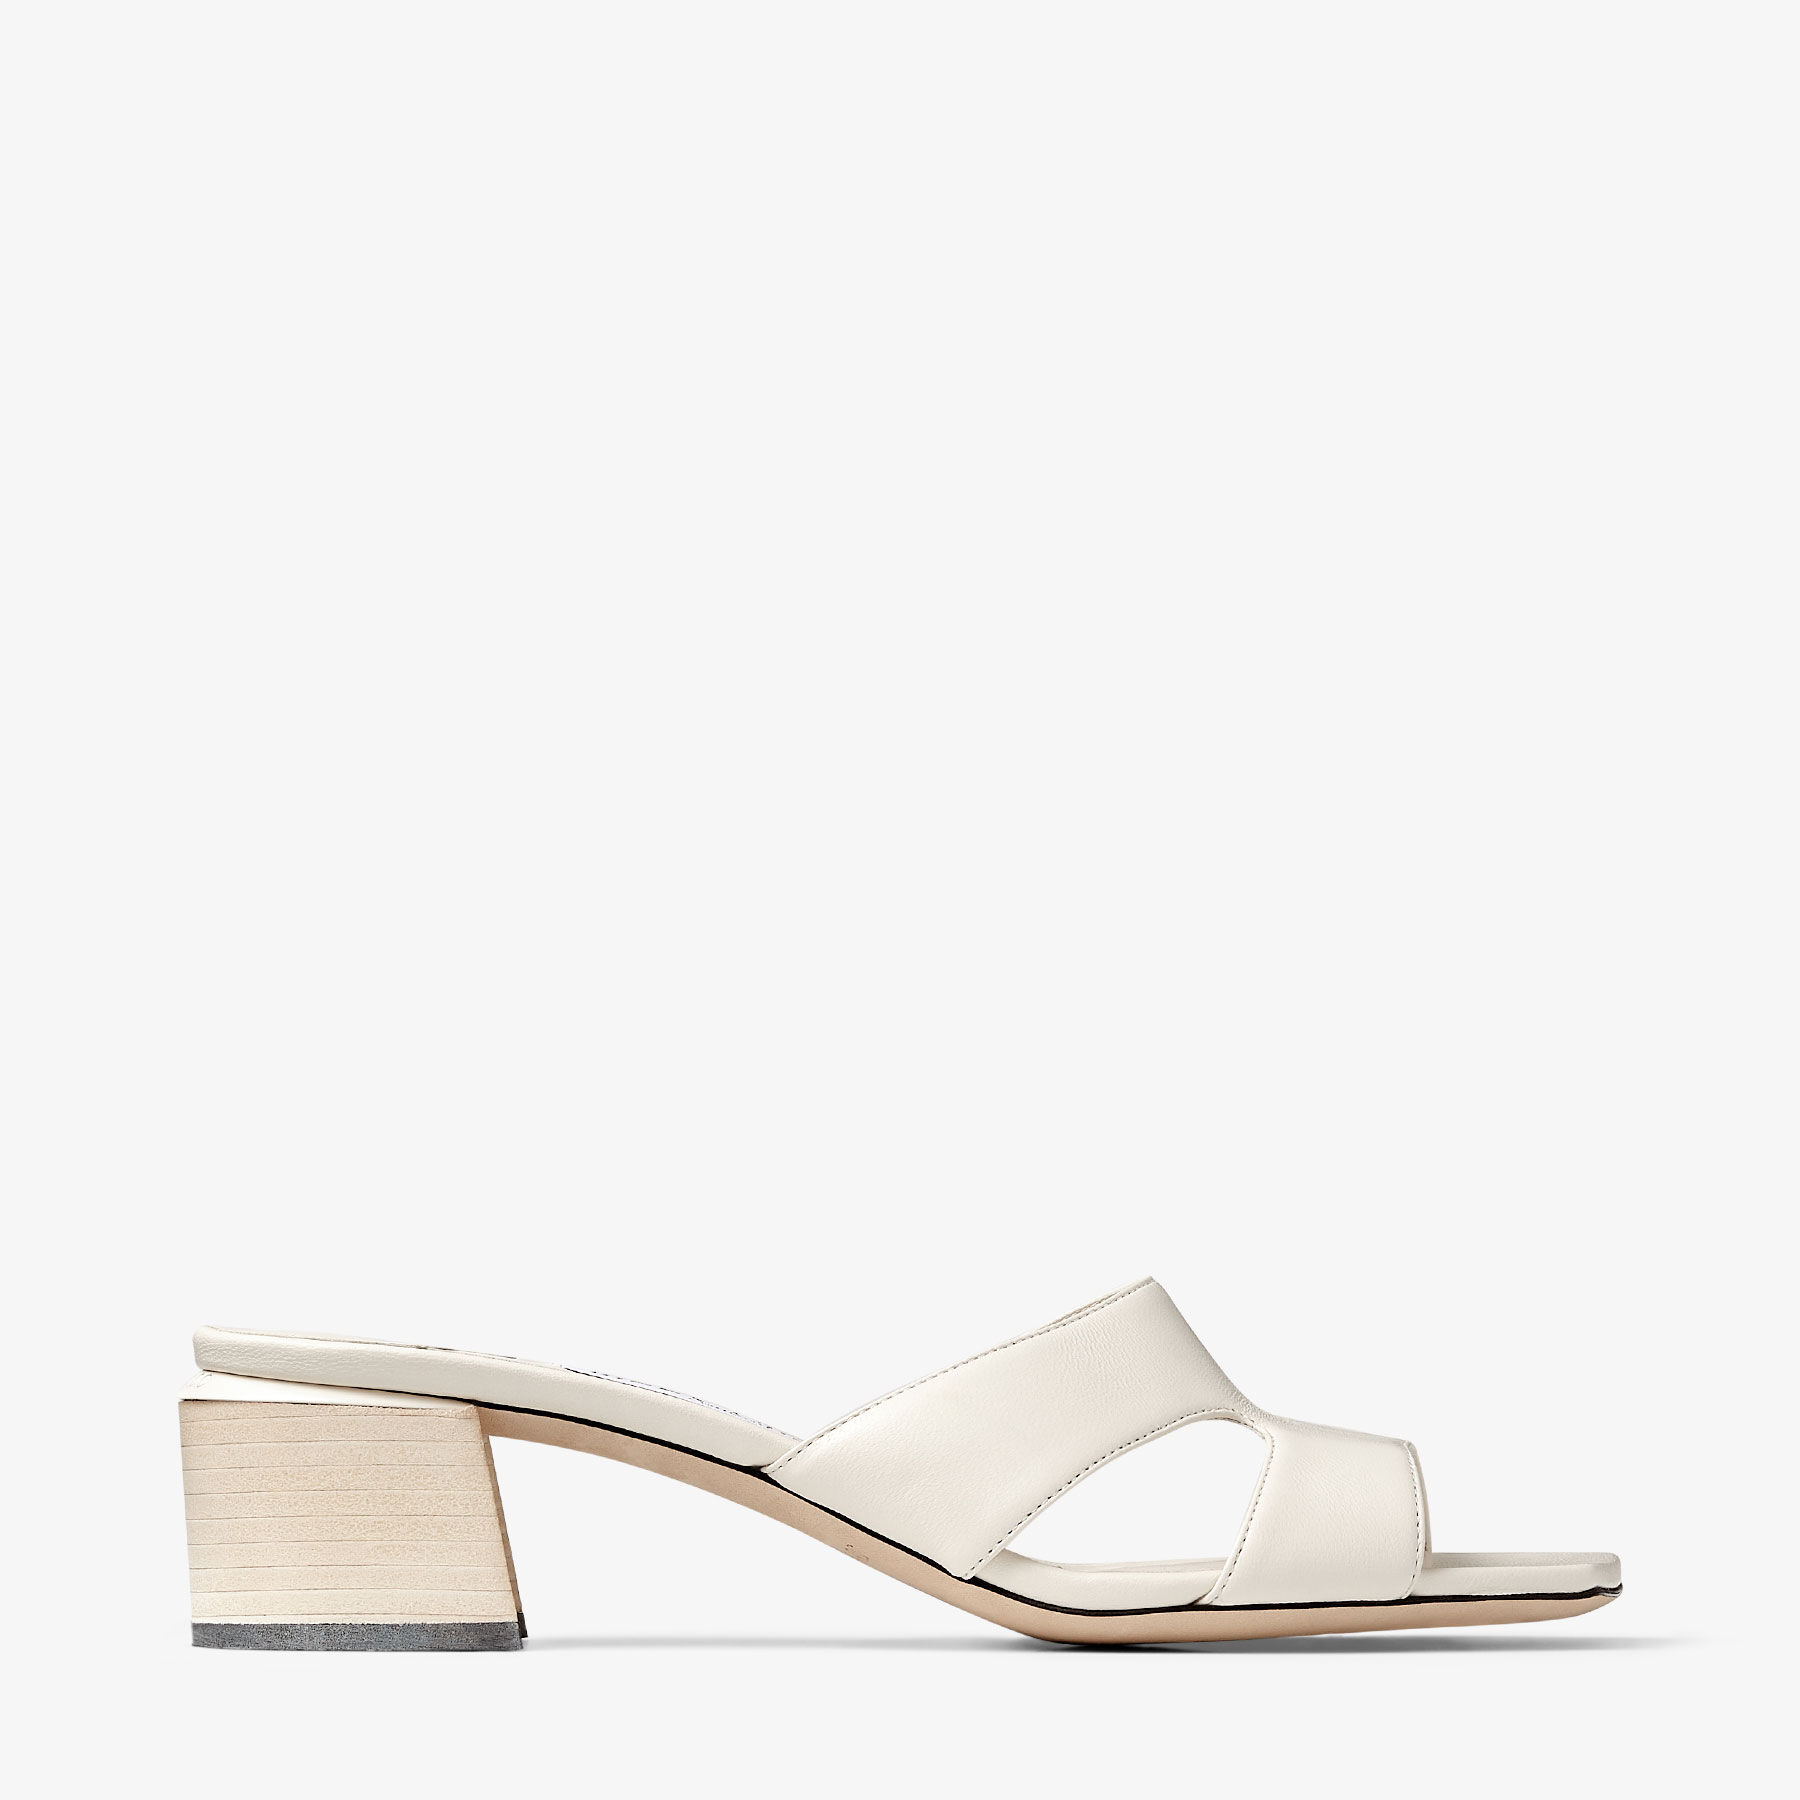 Ellison Mule 45 | Latte Nappa Leather Mules | New Collection 